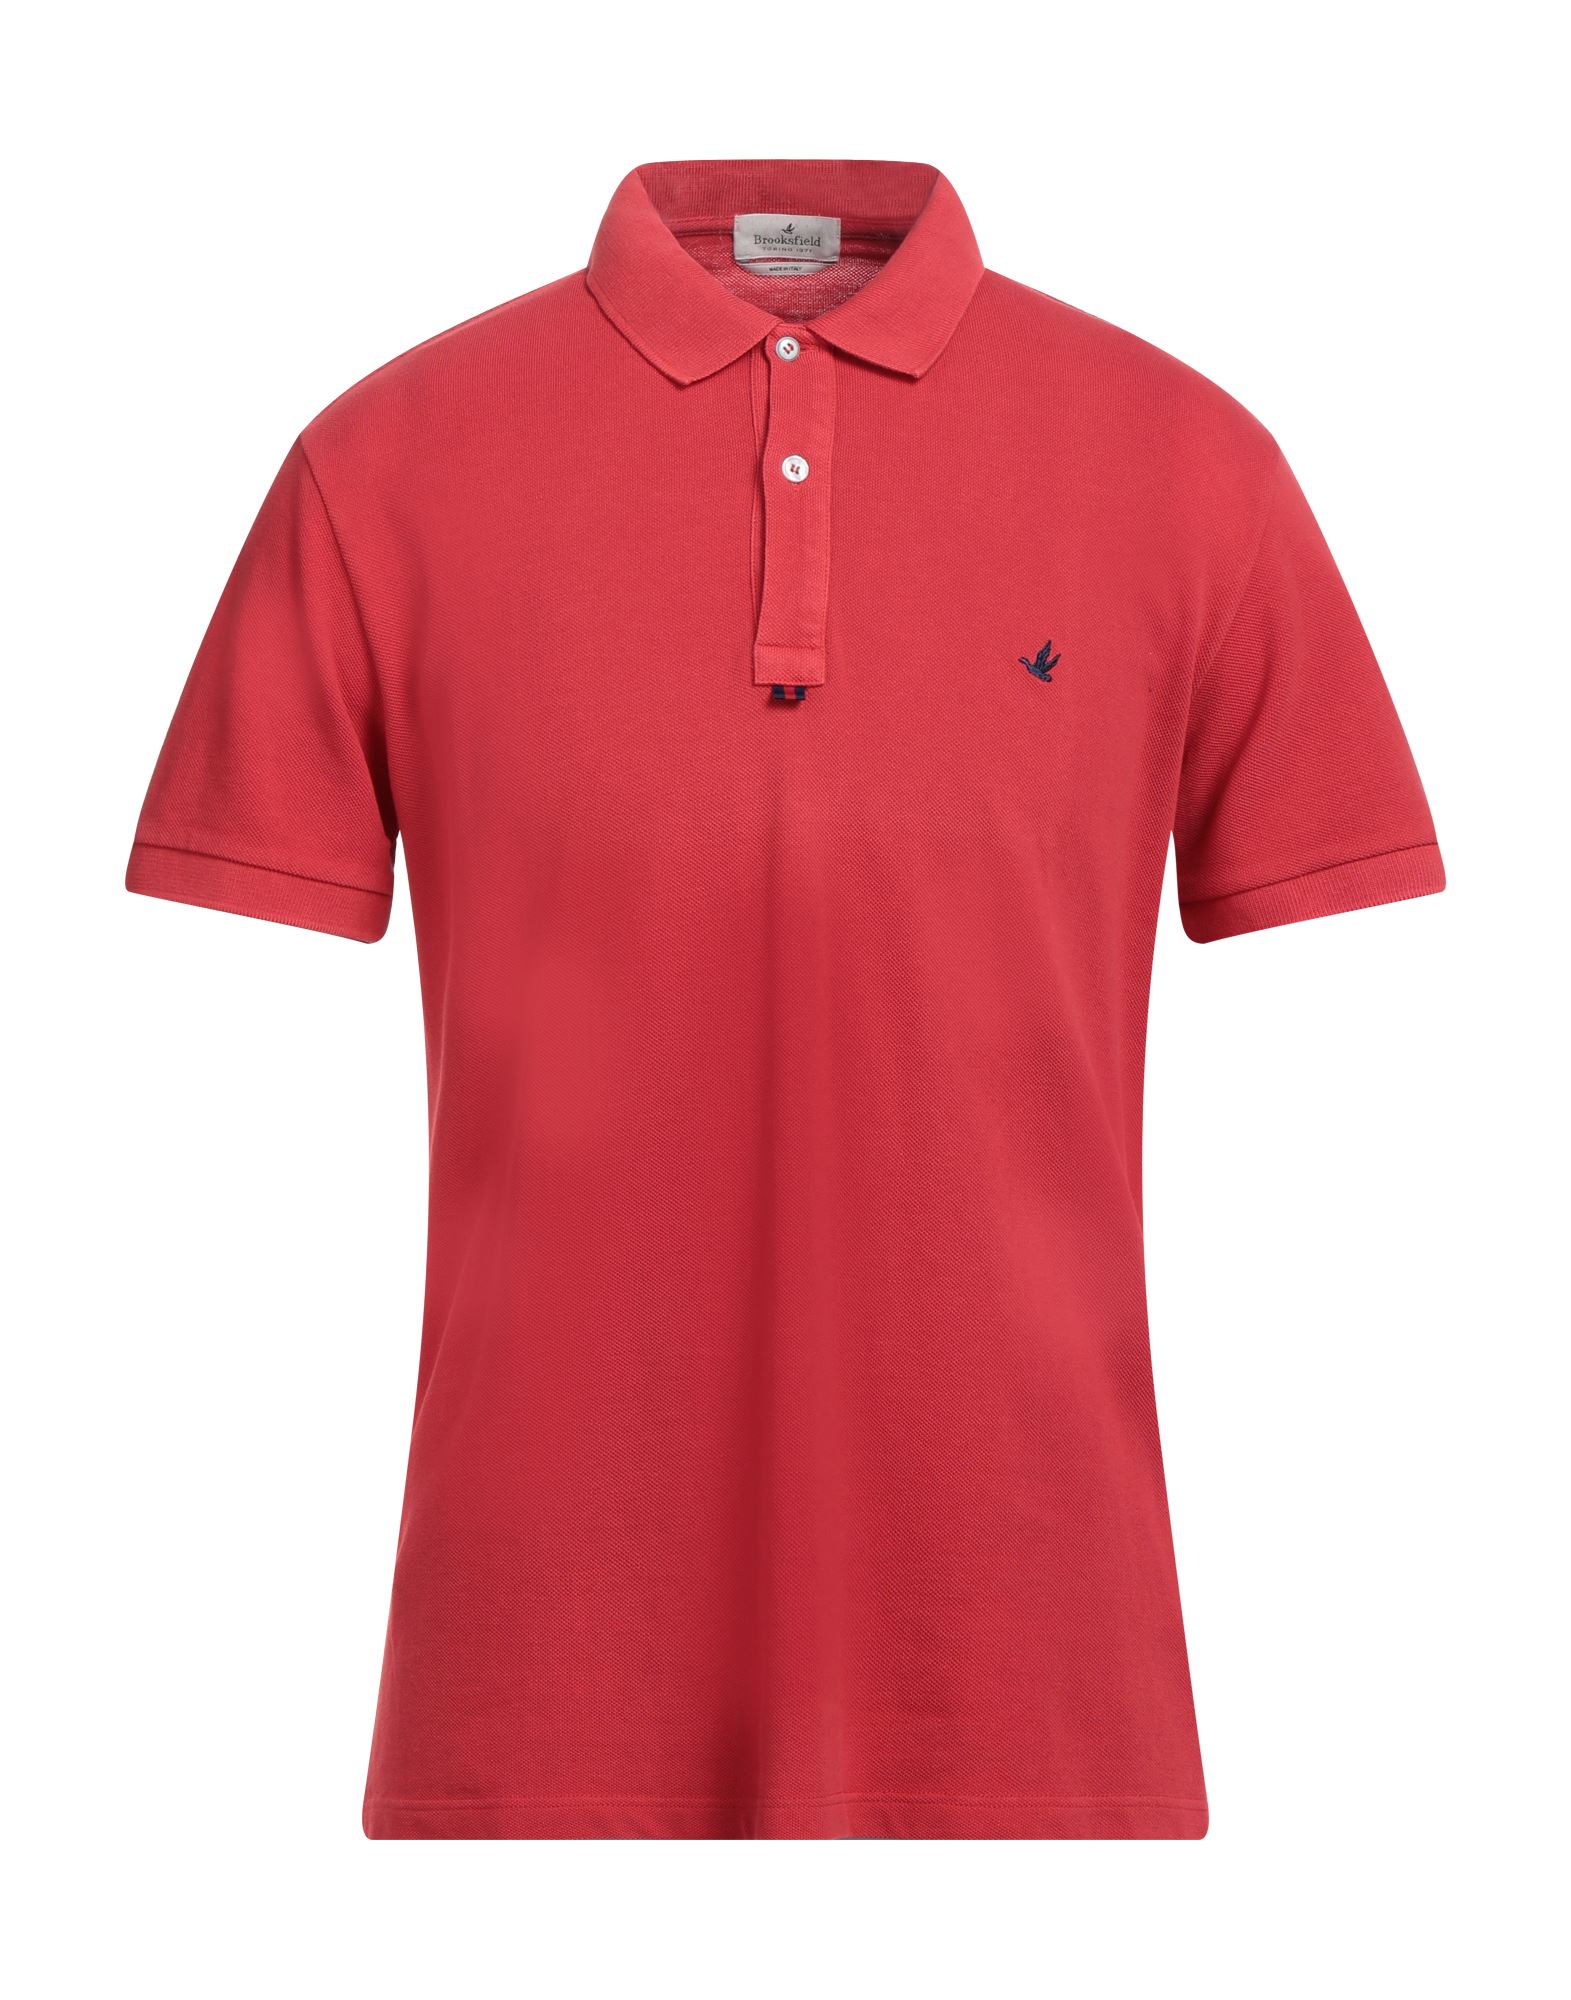 BROOKSFIELD BROOKSFIELD MAN POLO SHIRT RED SIZE 48 COTTON